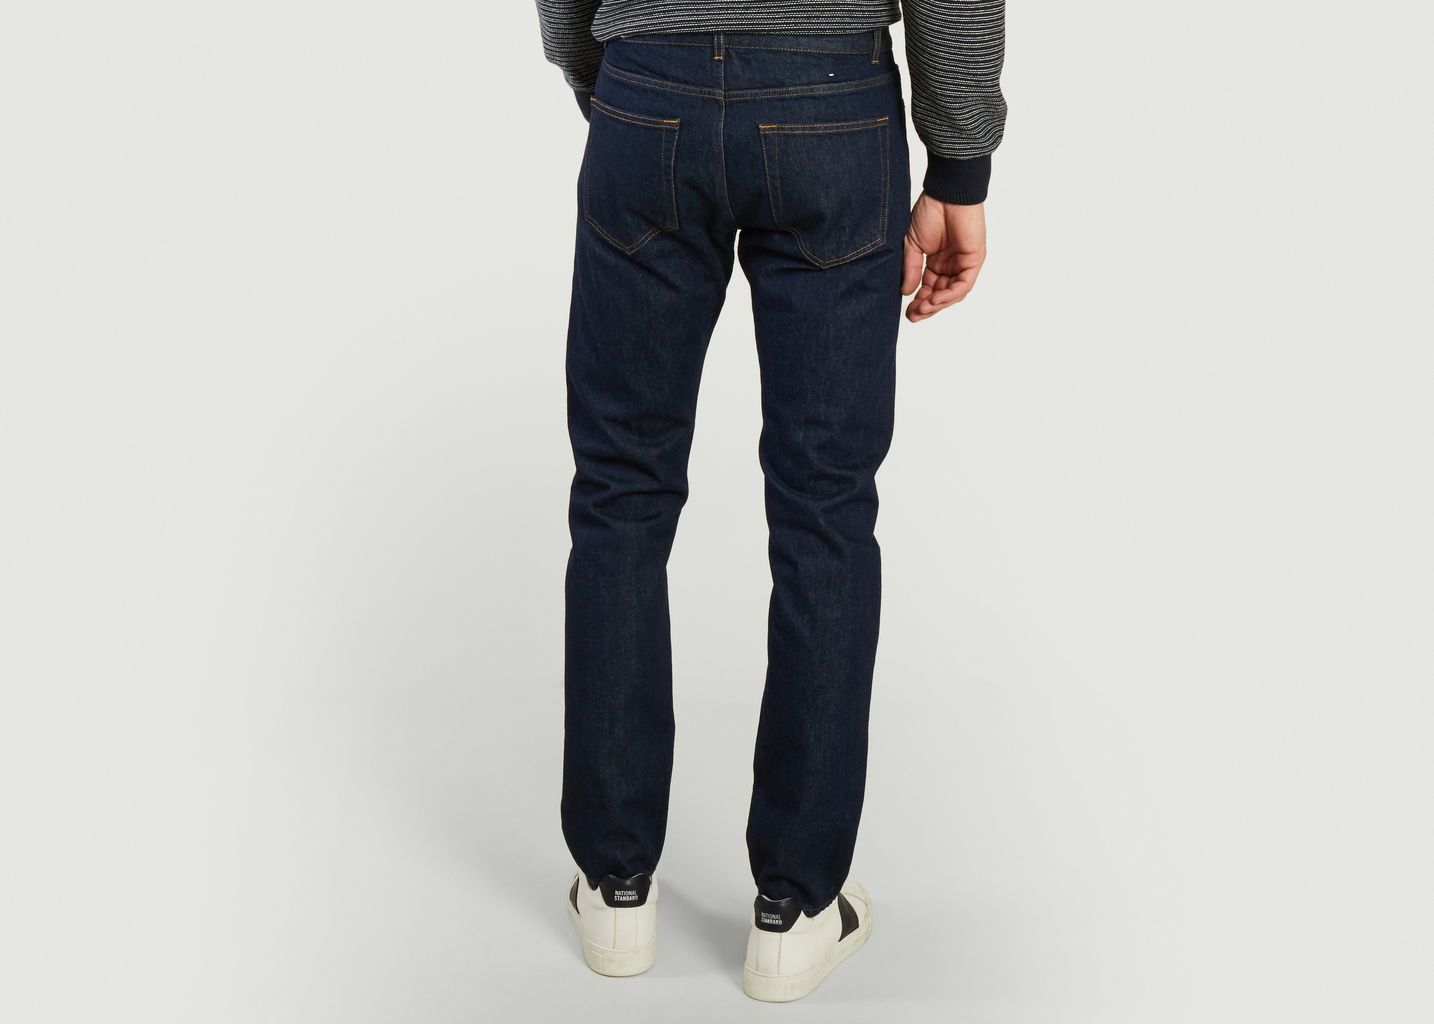 Norse Slim Denim - Norse Projects